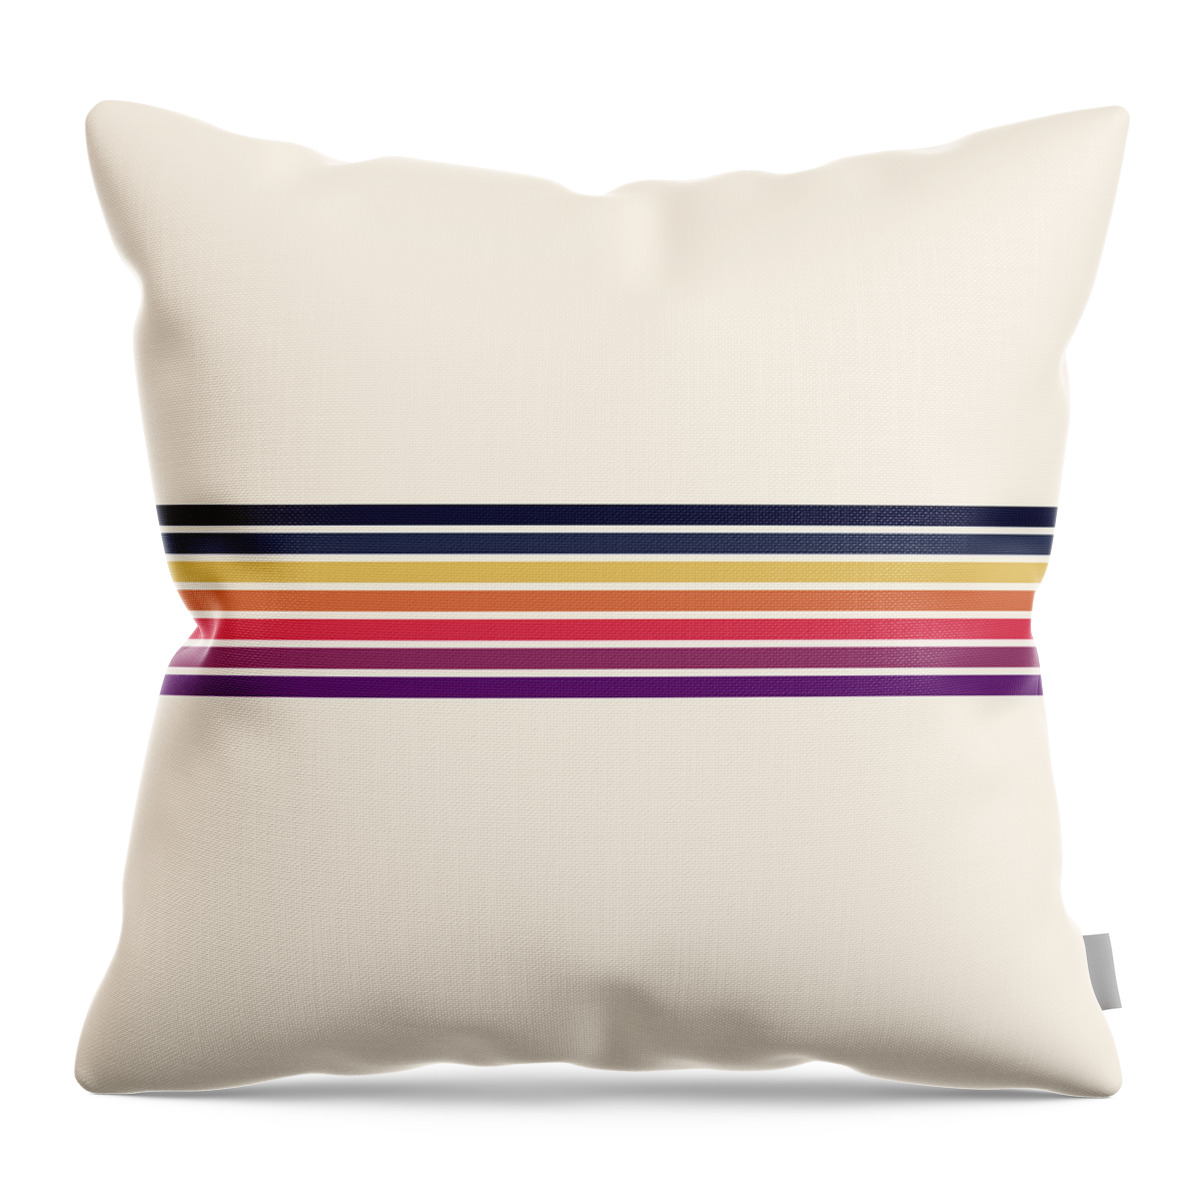 Striped Throw Pillow featuring the digital art Tamina - Classic Retro 70s Vintage Style Stripes by Alpha Omega